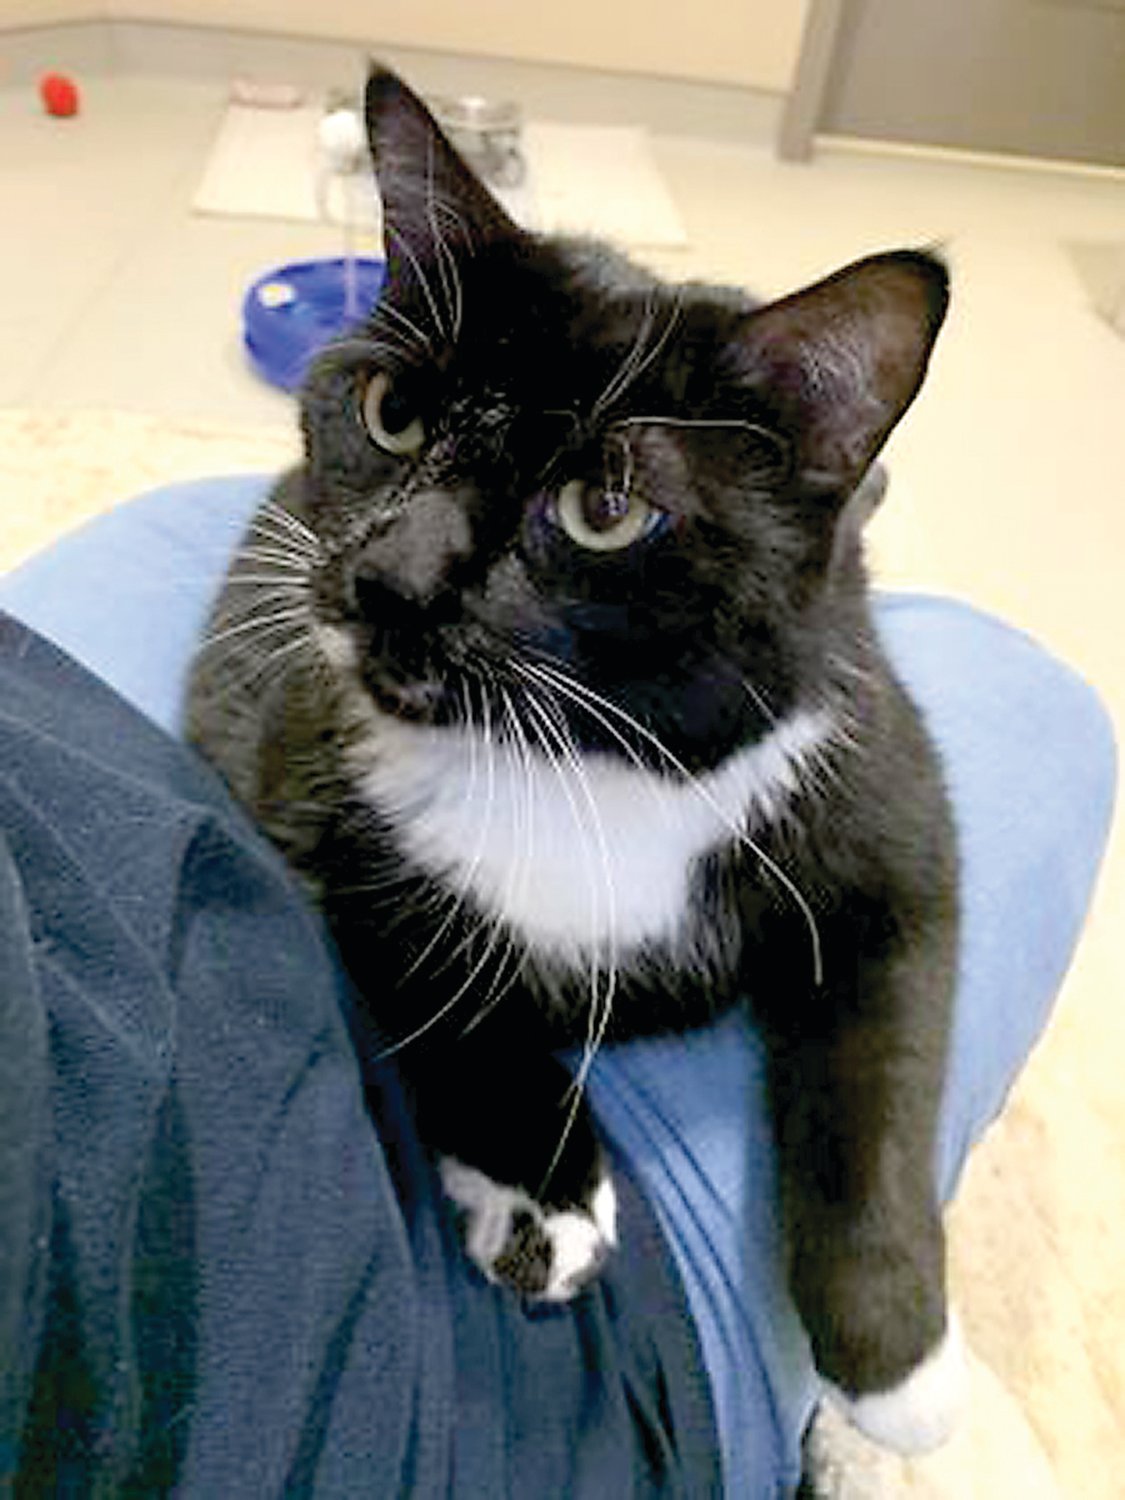 Thanks to a civil victory, Bootsie, who had been in the protective custody of the Bucks County SPCA since May 7, was finally able to be adopted on Oct. 3. The shelter needs help finding good homes for the 54 cats and kittens from the case who remain in their care.